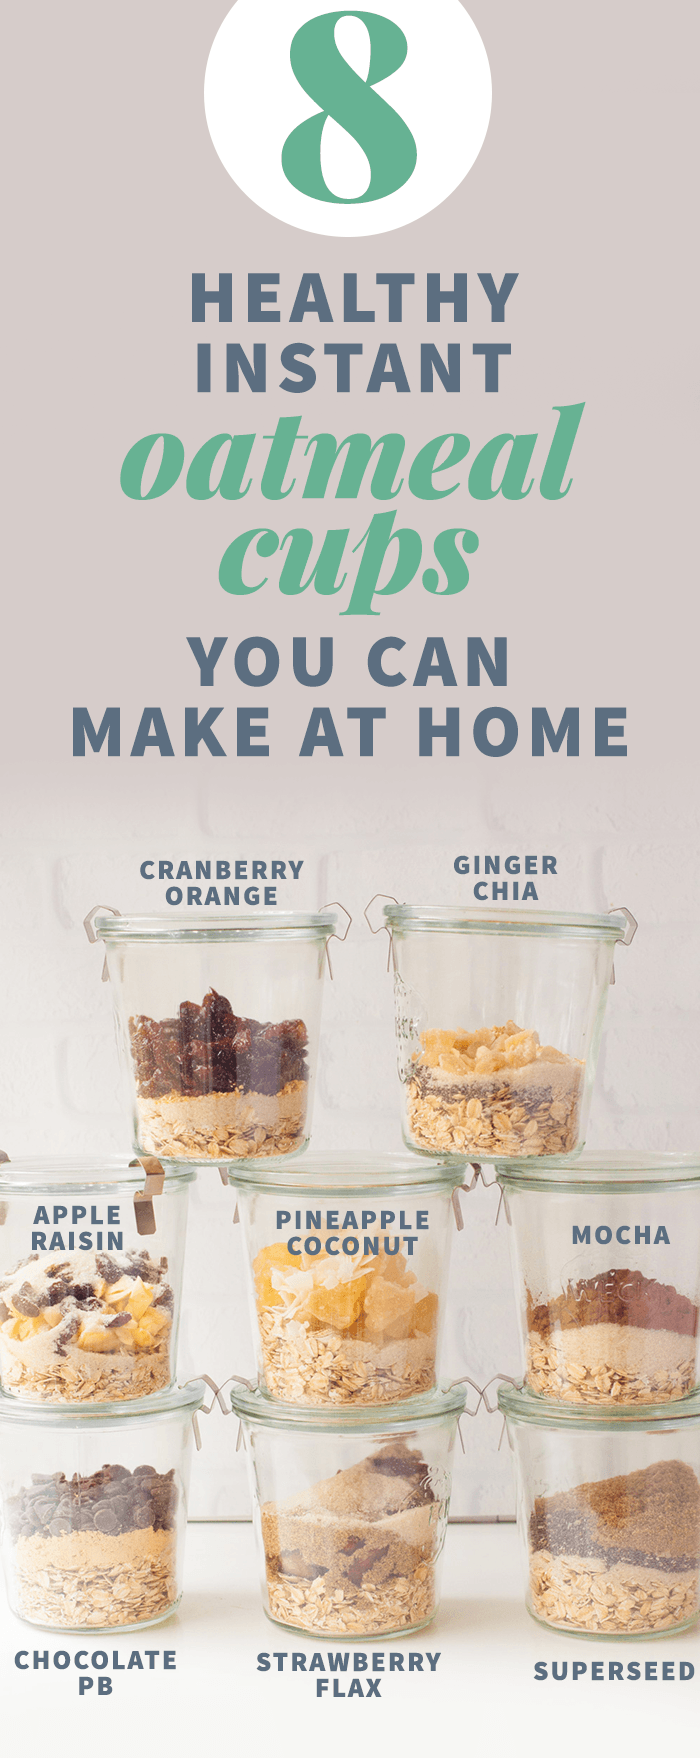 8 Healthy Instant Oatmeal Cups